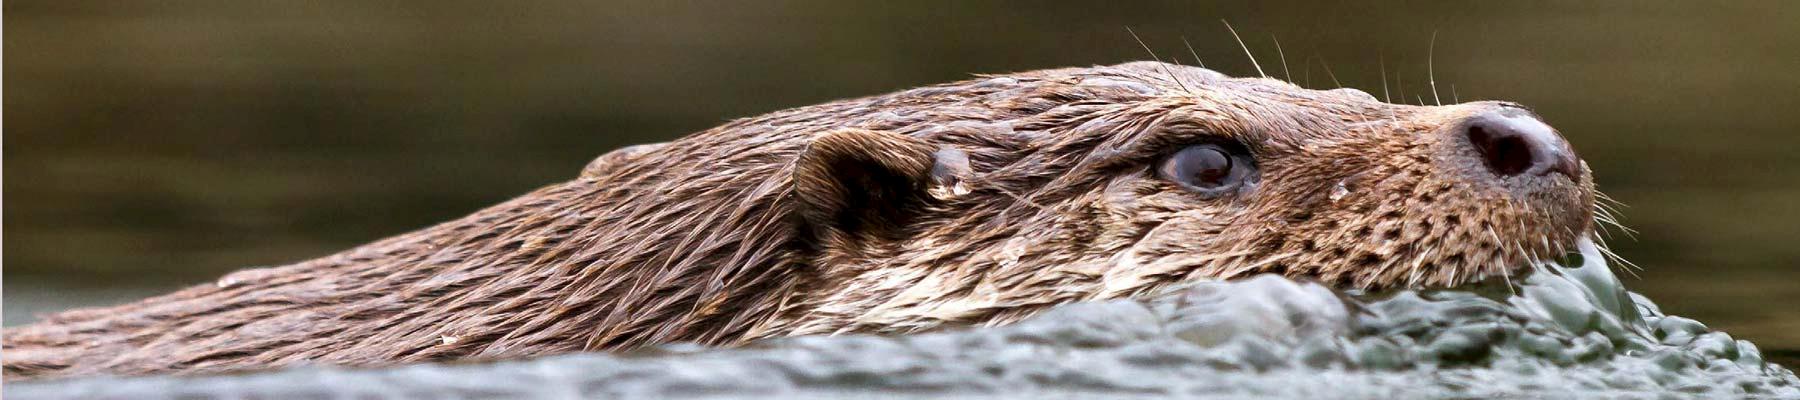 The Eurasian Otter is nominally protected by legislation in most of Southeast Asia © IUCN-Otter Specialist Group 